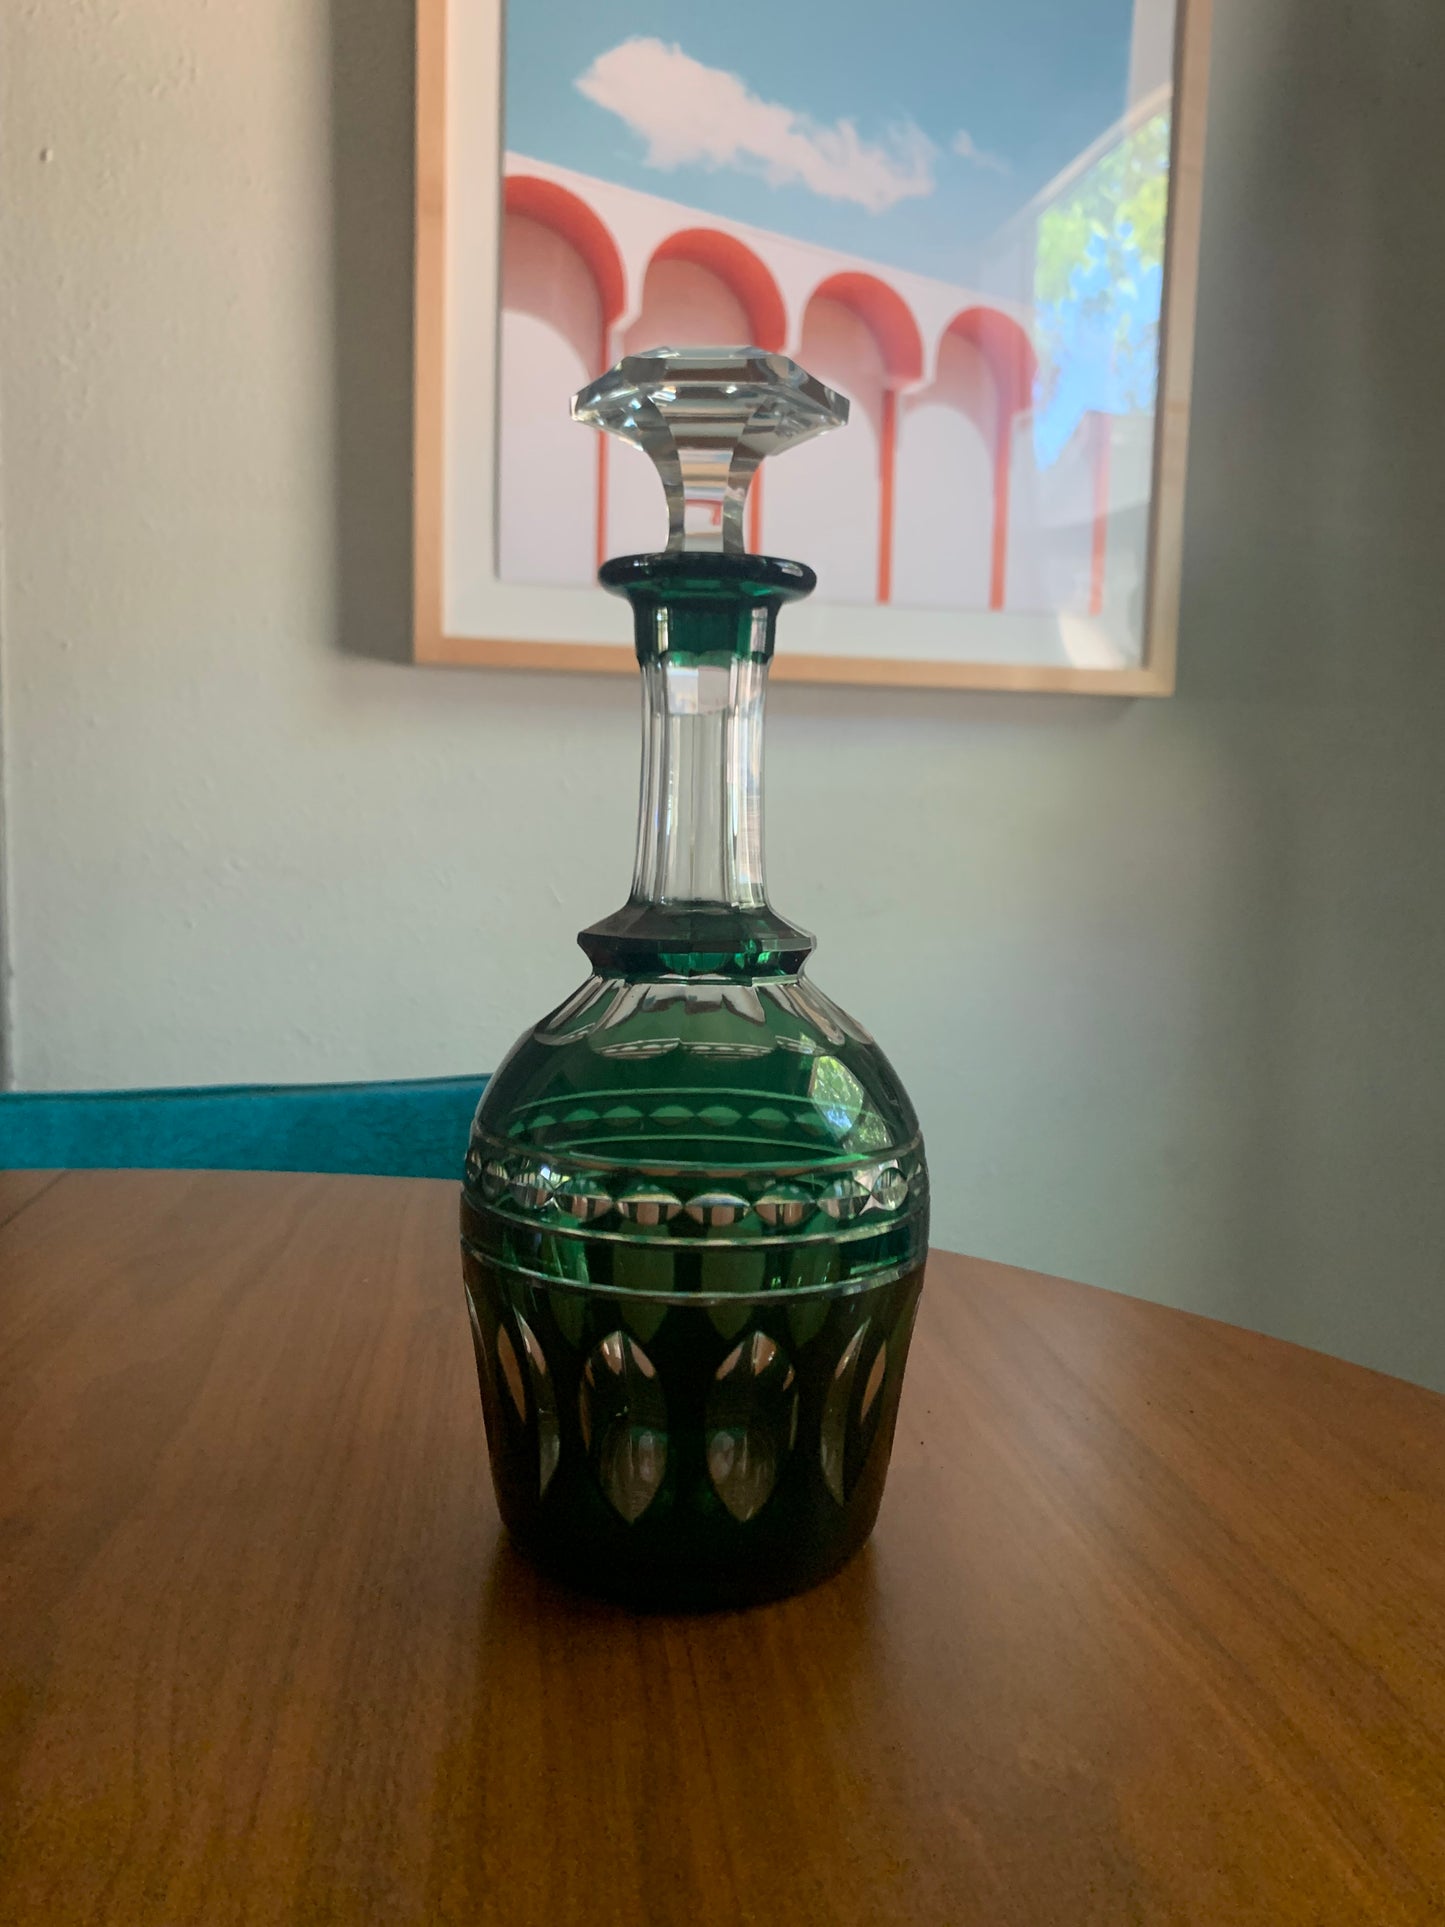 Emerald Green Cut Glass Decanter and Glasses